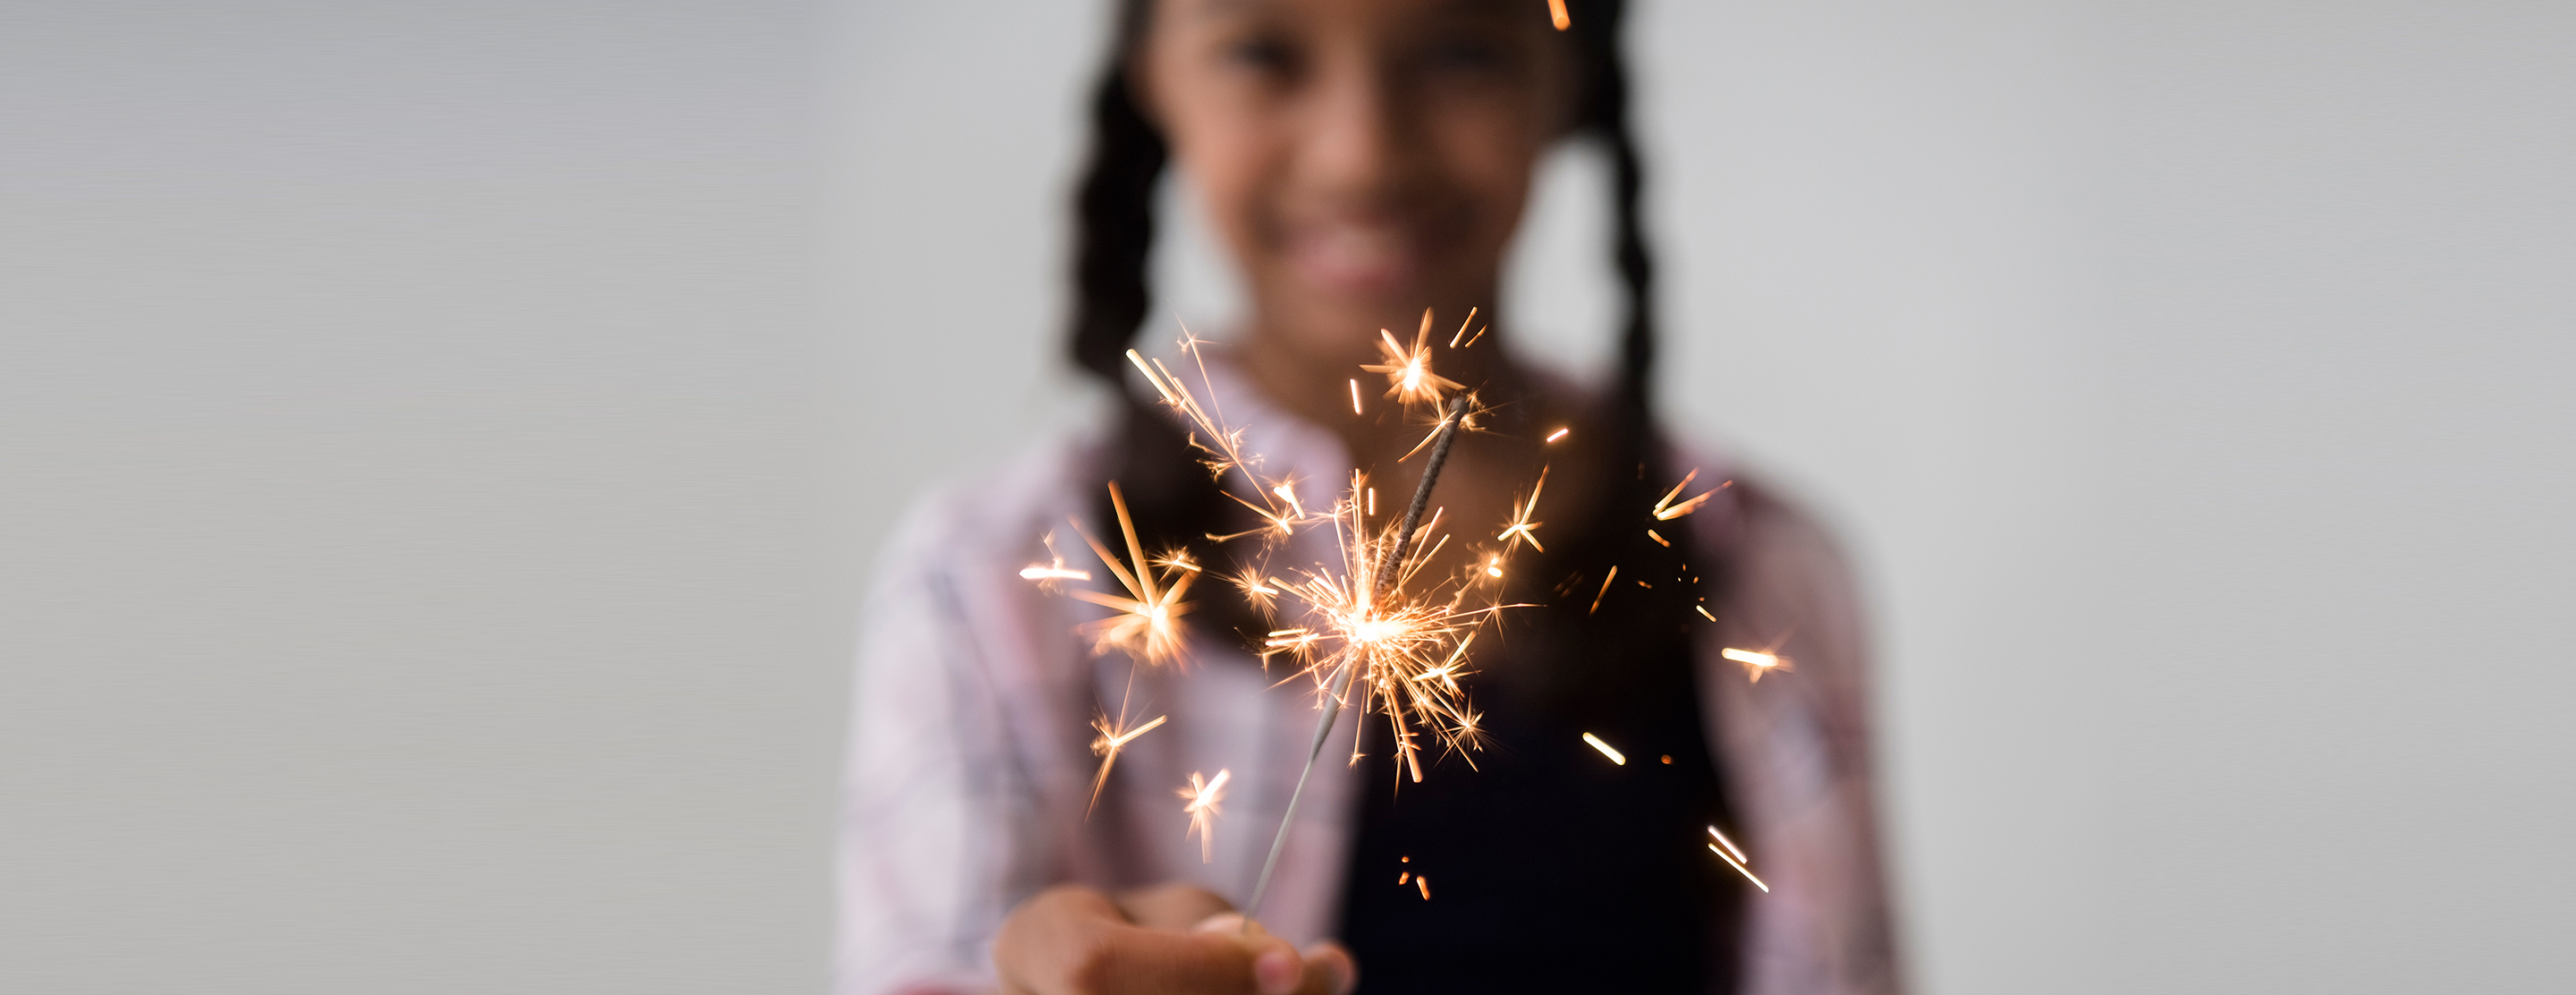 fireworks-safety-tips-for-parents-2x